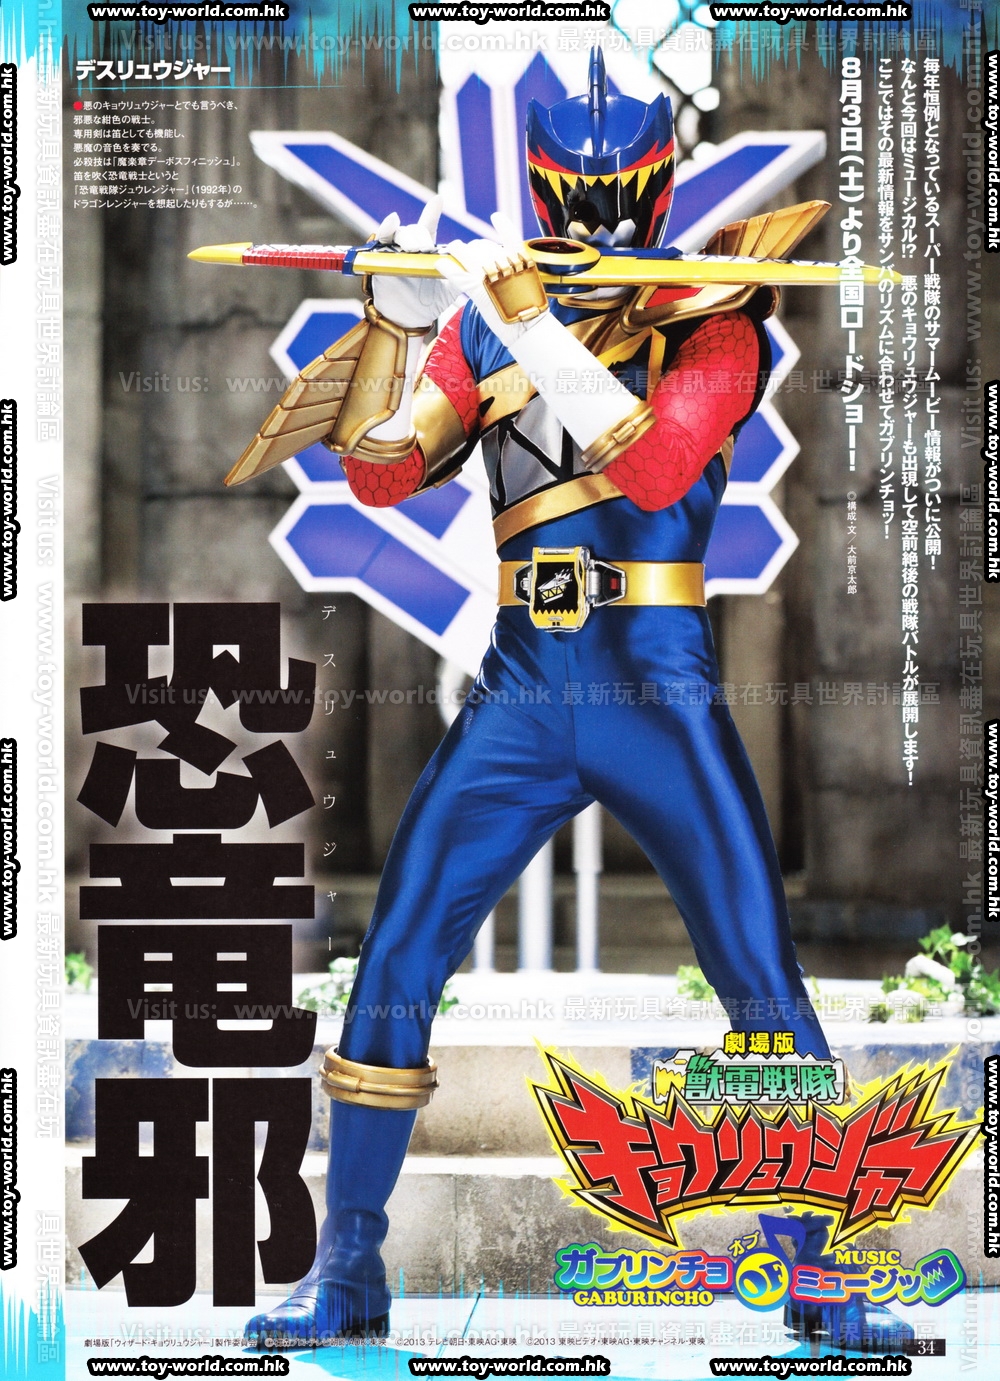 The center of anime and toku: Kyoryuger the Movie: More Deathryuger Images